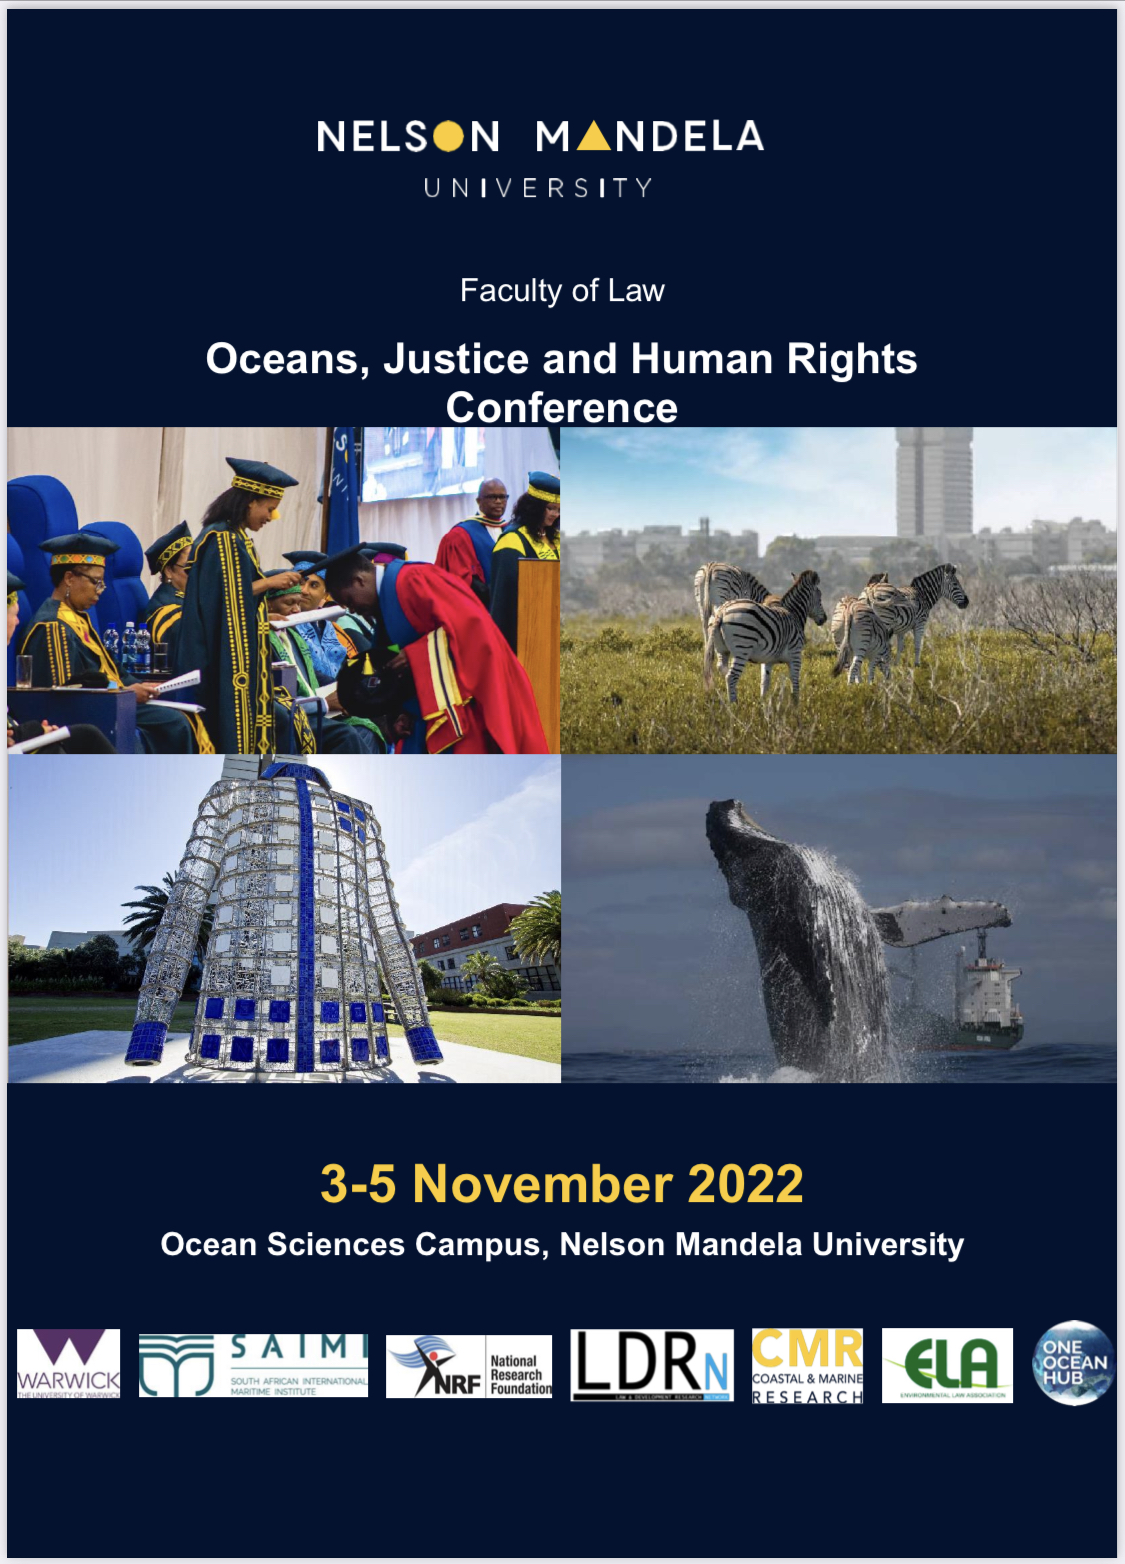 Nelson Mandela University: Oceans, Justice and Human Rights Conference